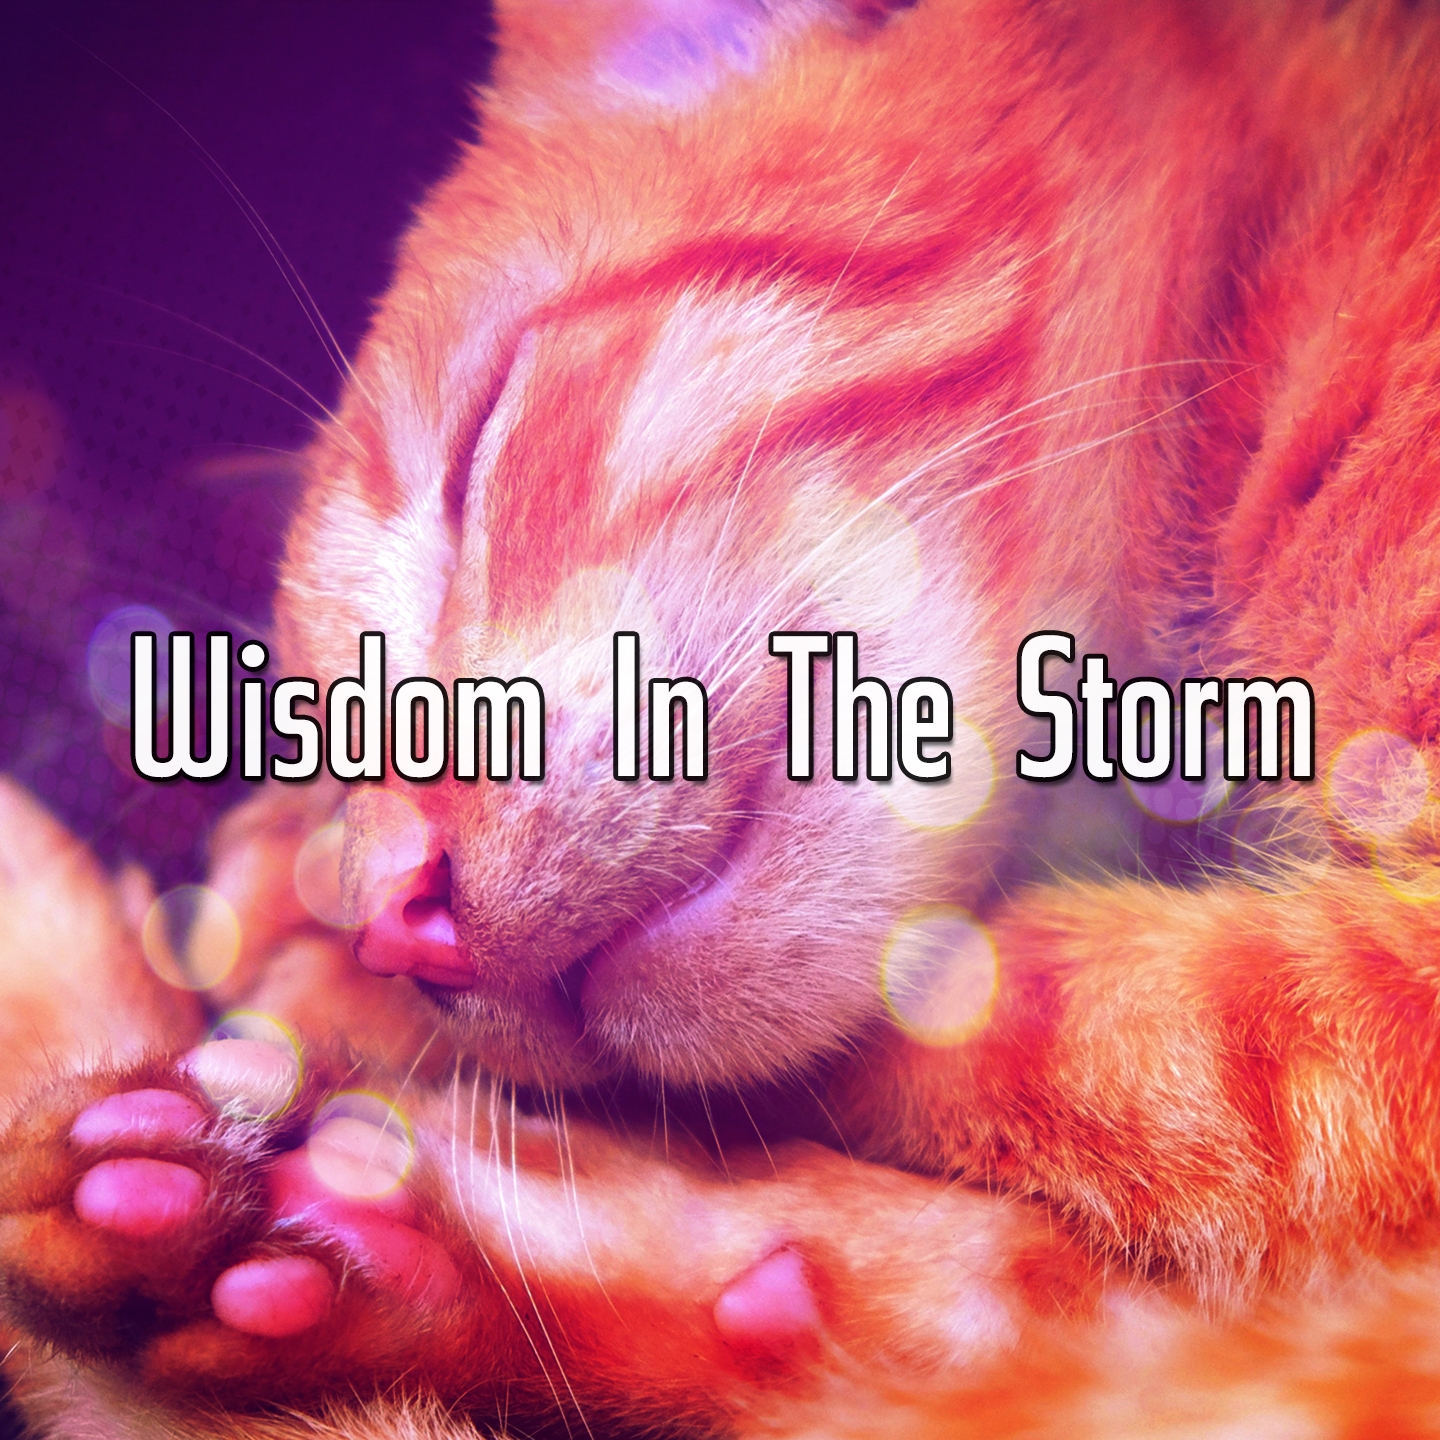 Wisdom In The Storm